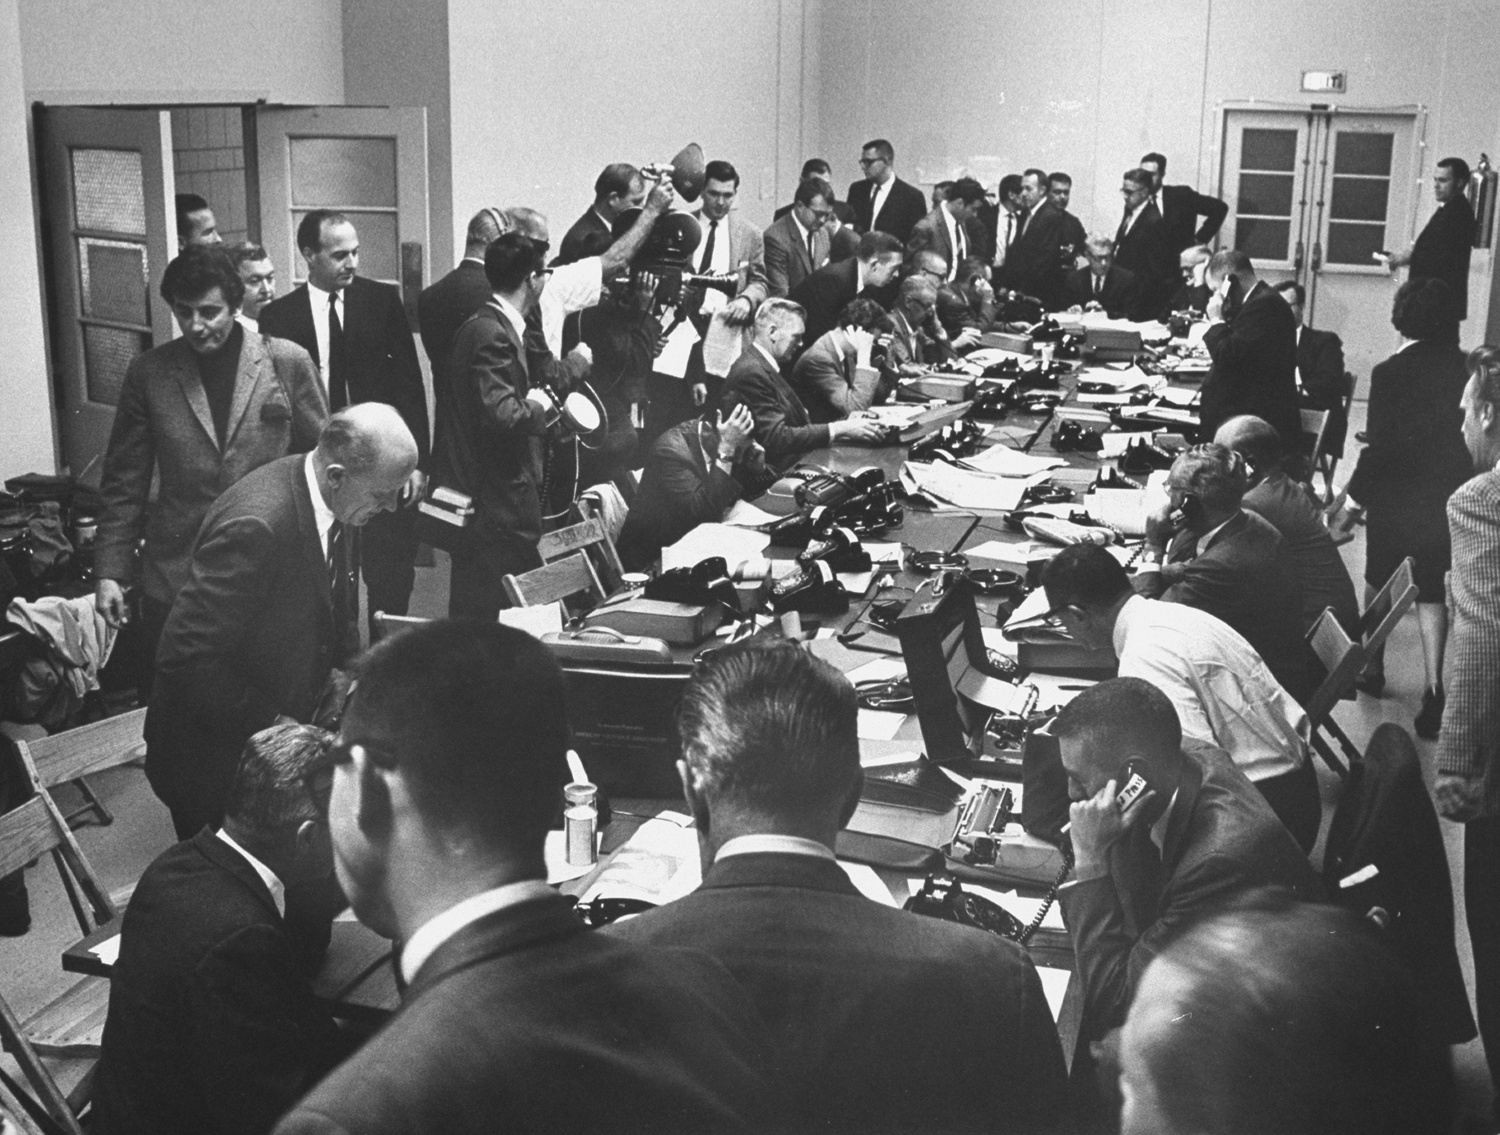 Reporters and photographers (incl. Harry Benson, at left in black shirt) waiting for information on President Lyndon B. Johnson's condition after a gall bladder operation at Bethesda Naval Hospital, 1965.